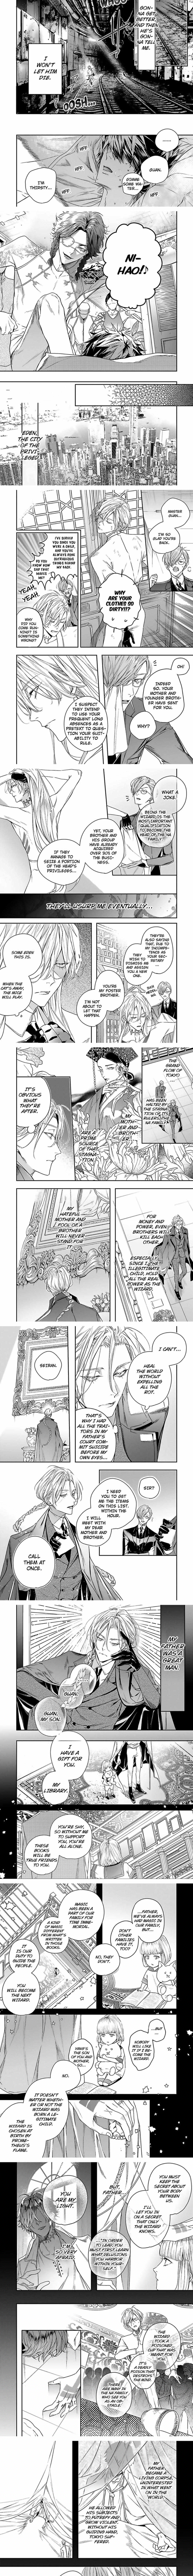 World's End Blue Bird - Page 2